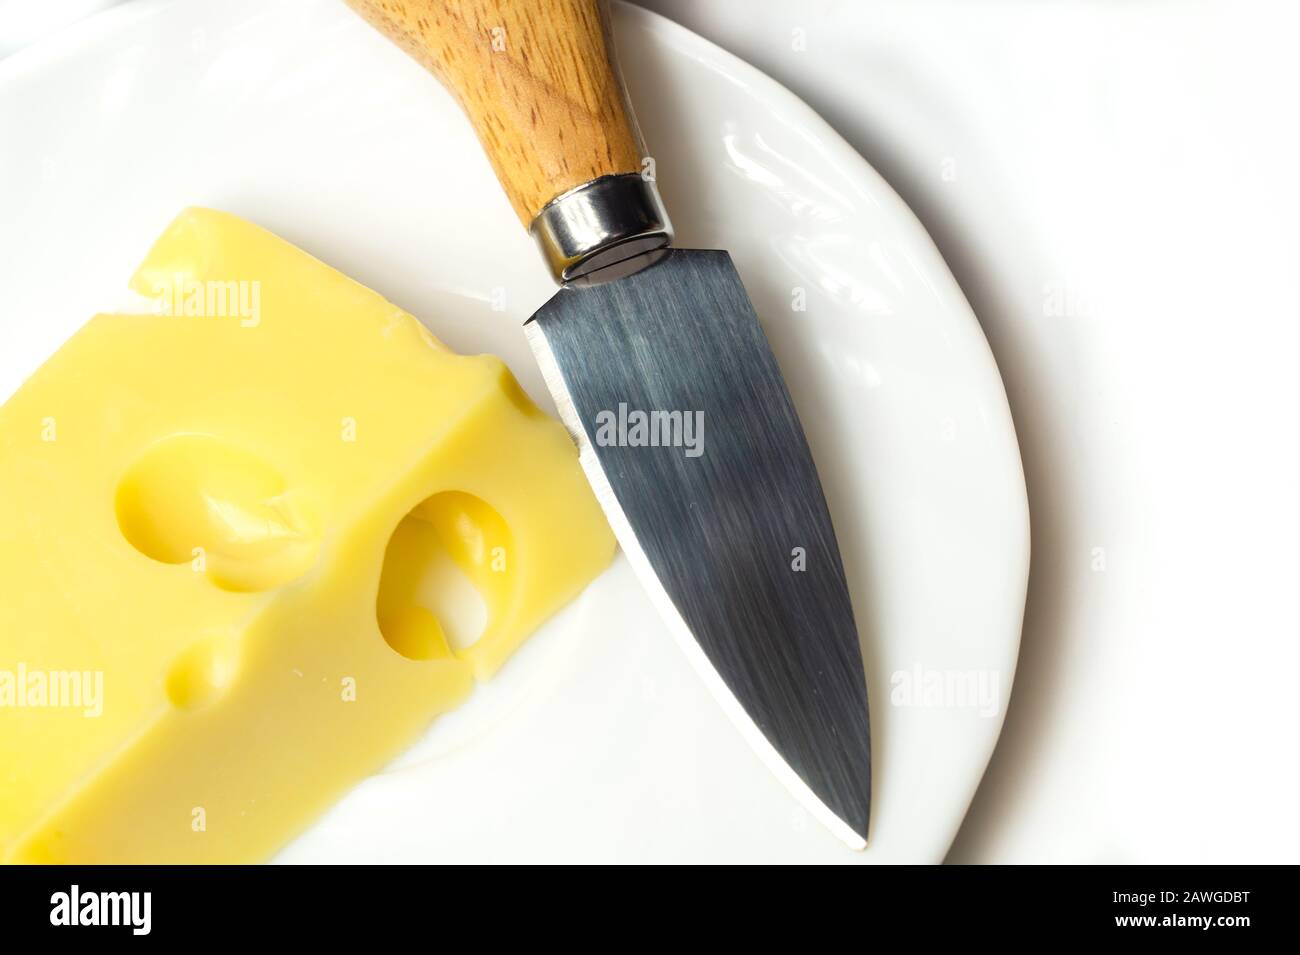 Cheese with a cheese knife on a white plate. piece of cheese with holes Stock Photo